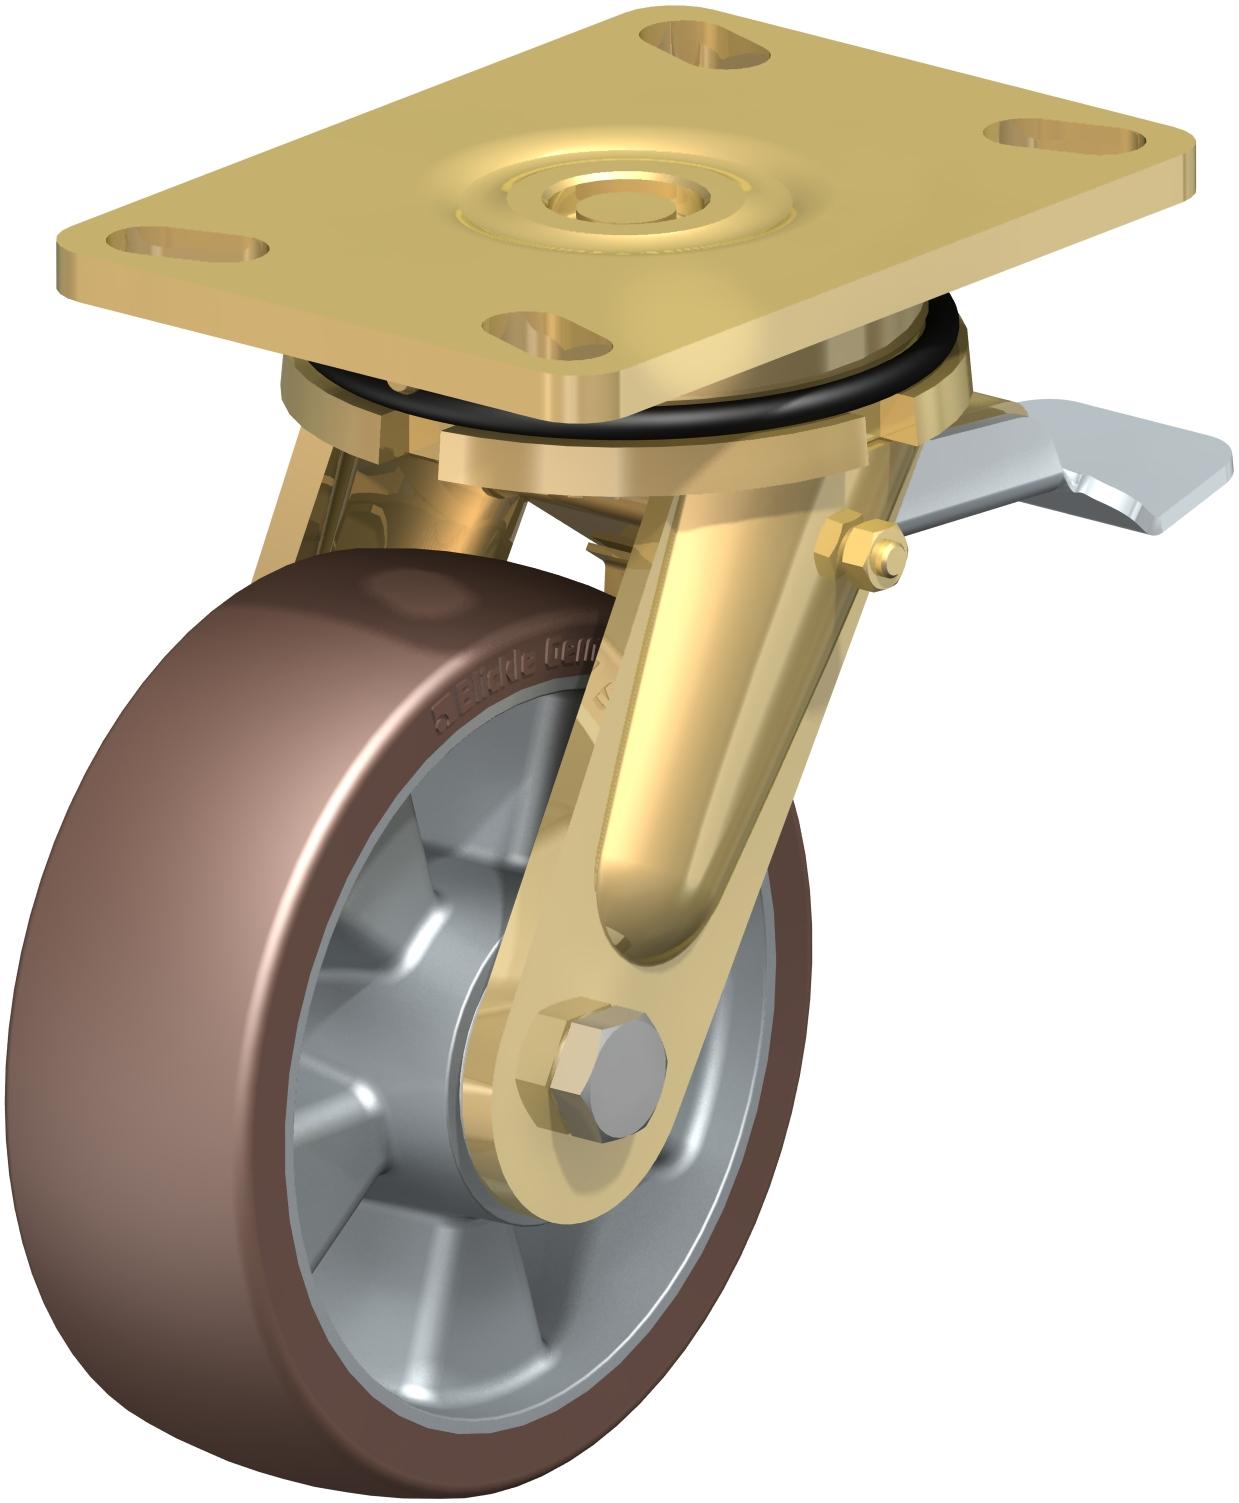 Extra Heavy Duty Top Plate Casters - Swivel, Ball Bearing, Blickle Besthane Brown Polyurethane Tread On Aluminum Core Wheel, Stop-Top Brake